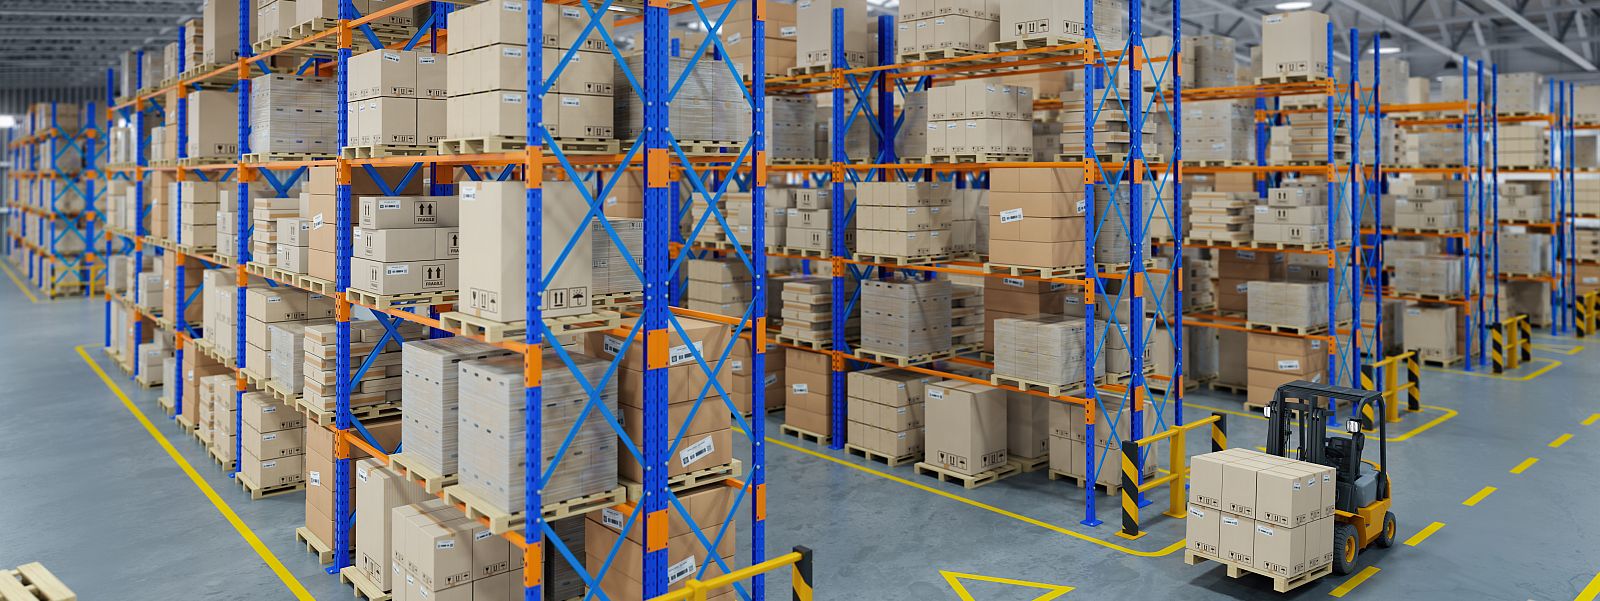 Forklift truck in warehouse or storage and shelves with cardboar